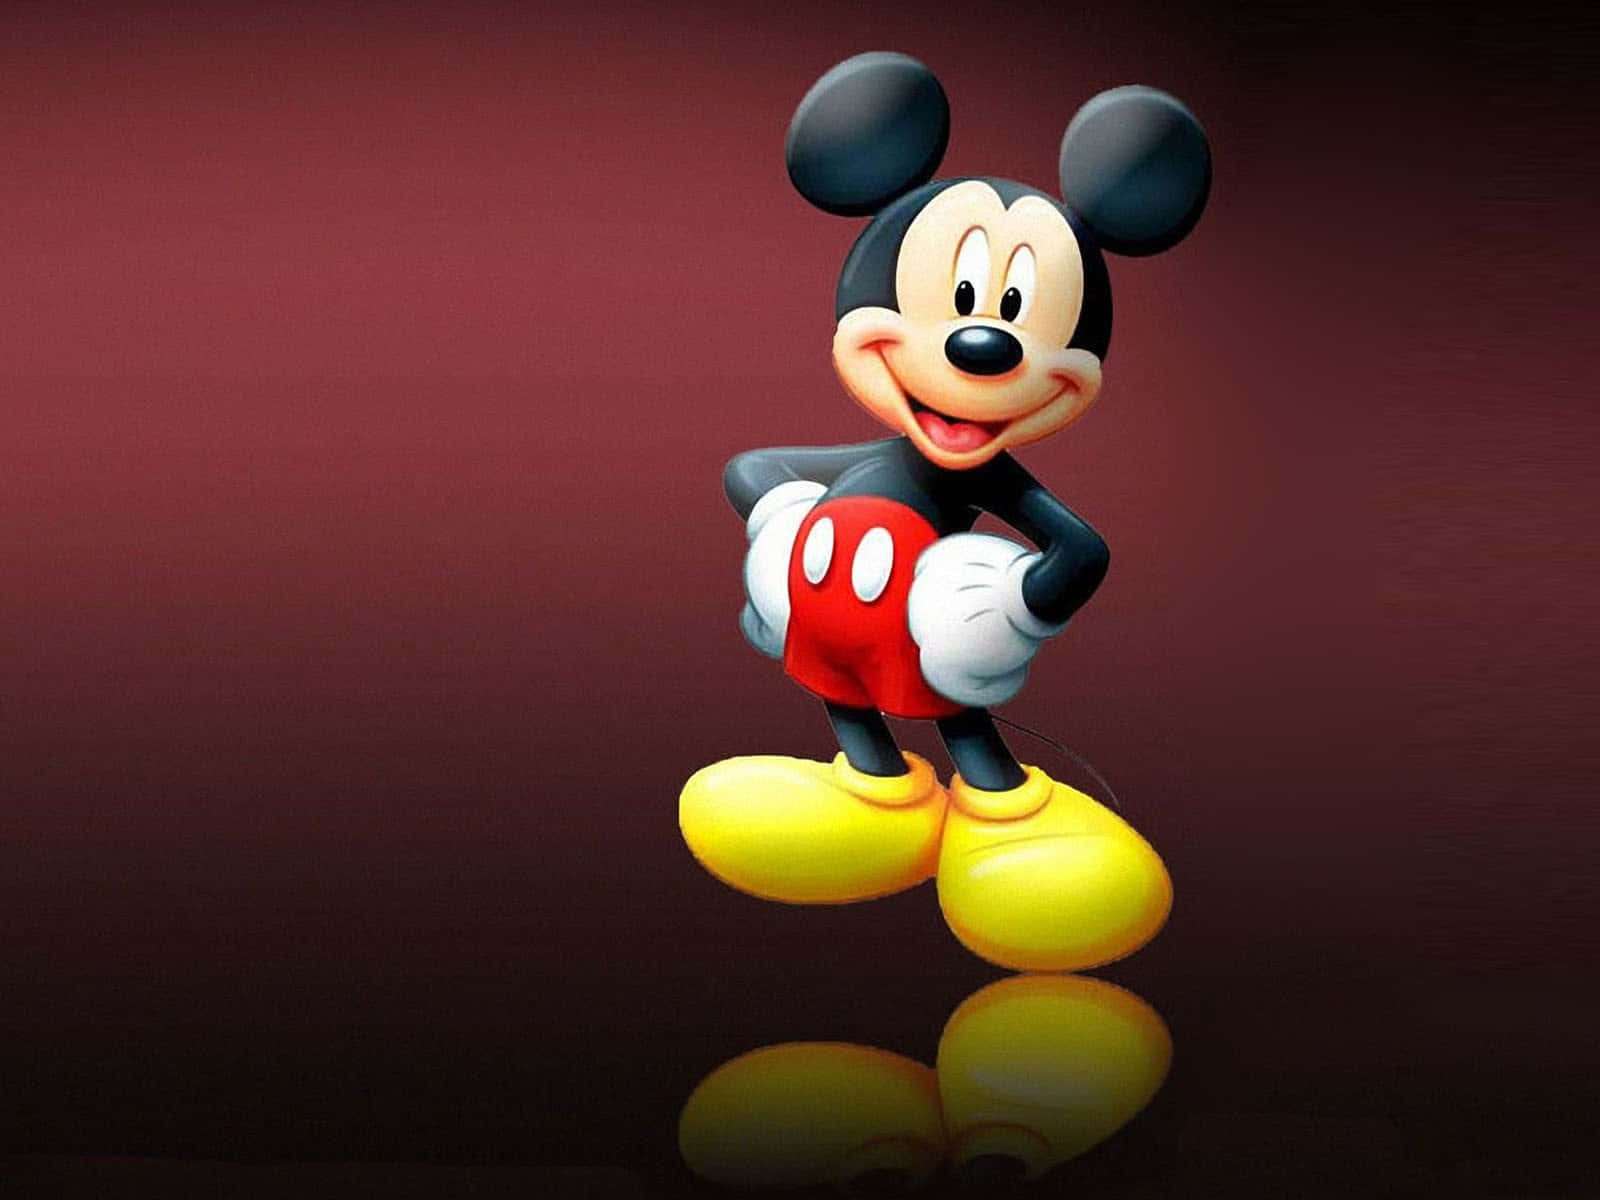 The ever-endearing Mickey Mouse in all his glory!